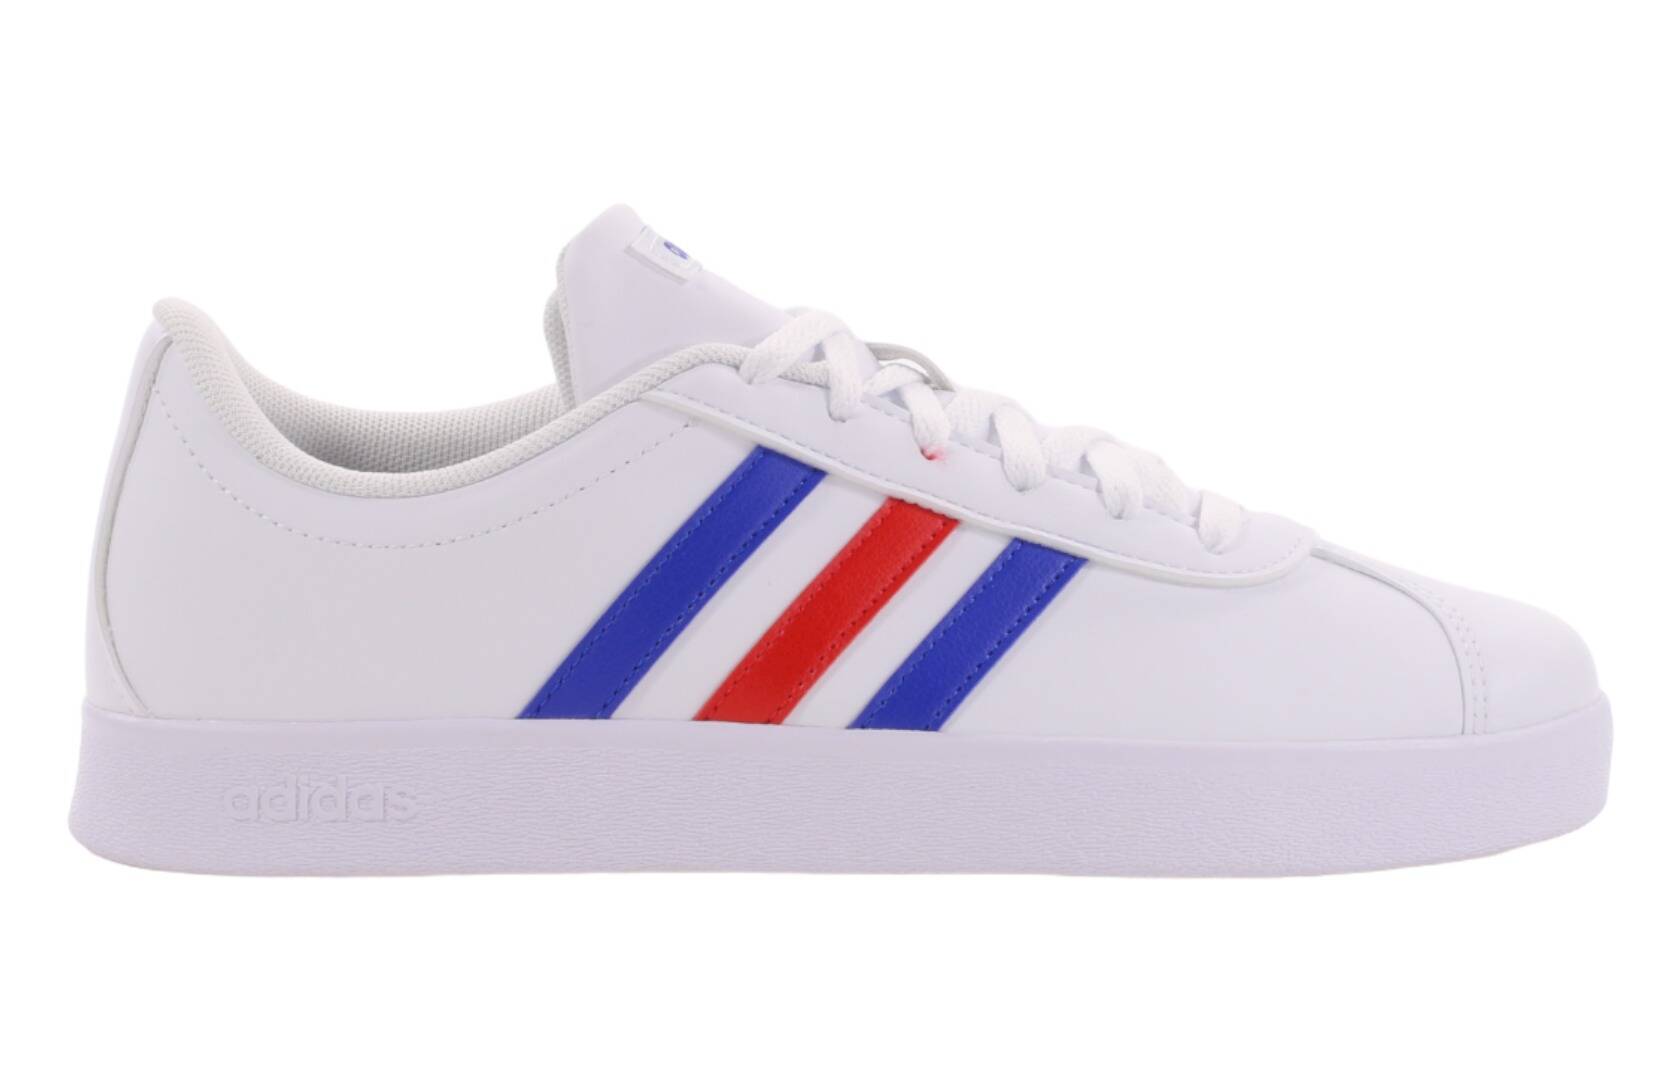 Adidas VL COURT 2.0 K FY7170 youth shoes